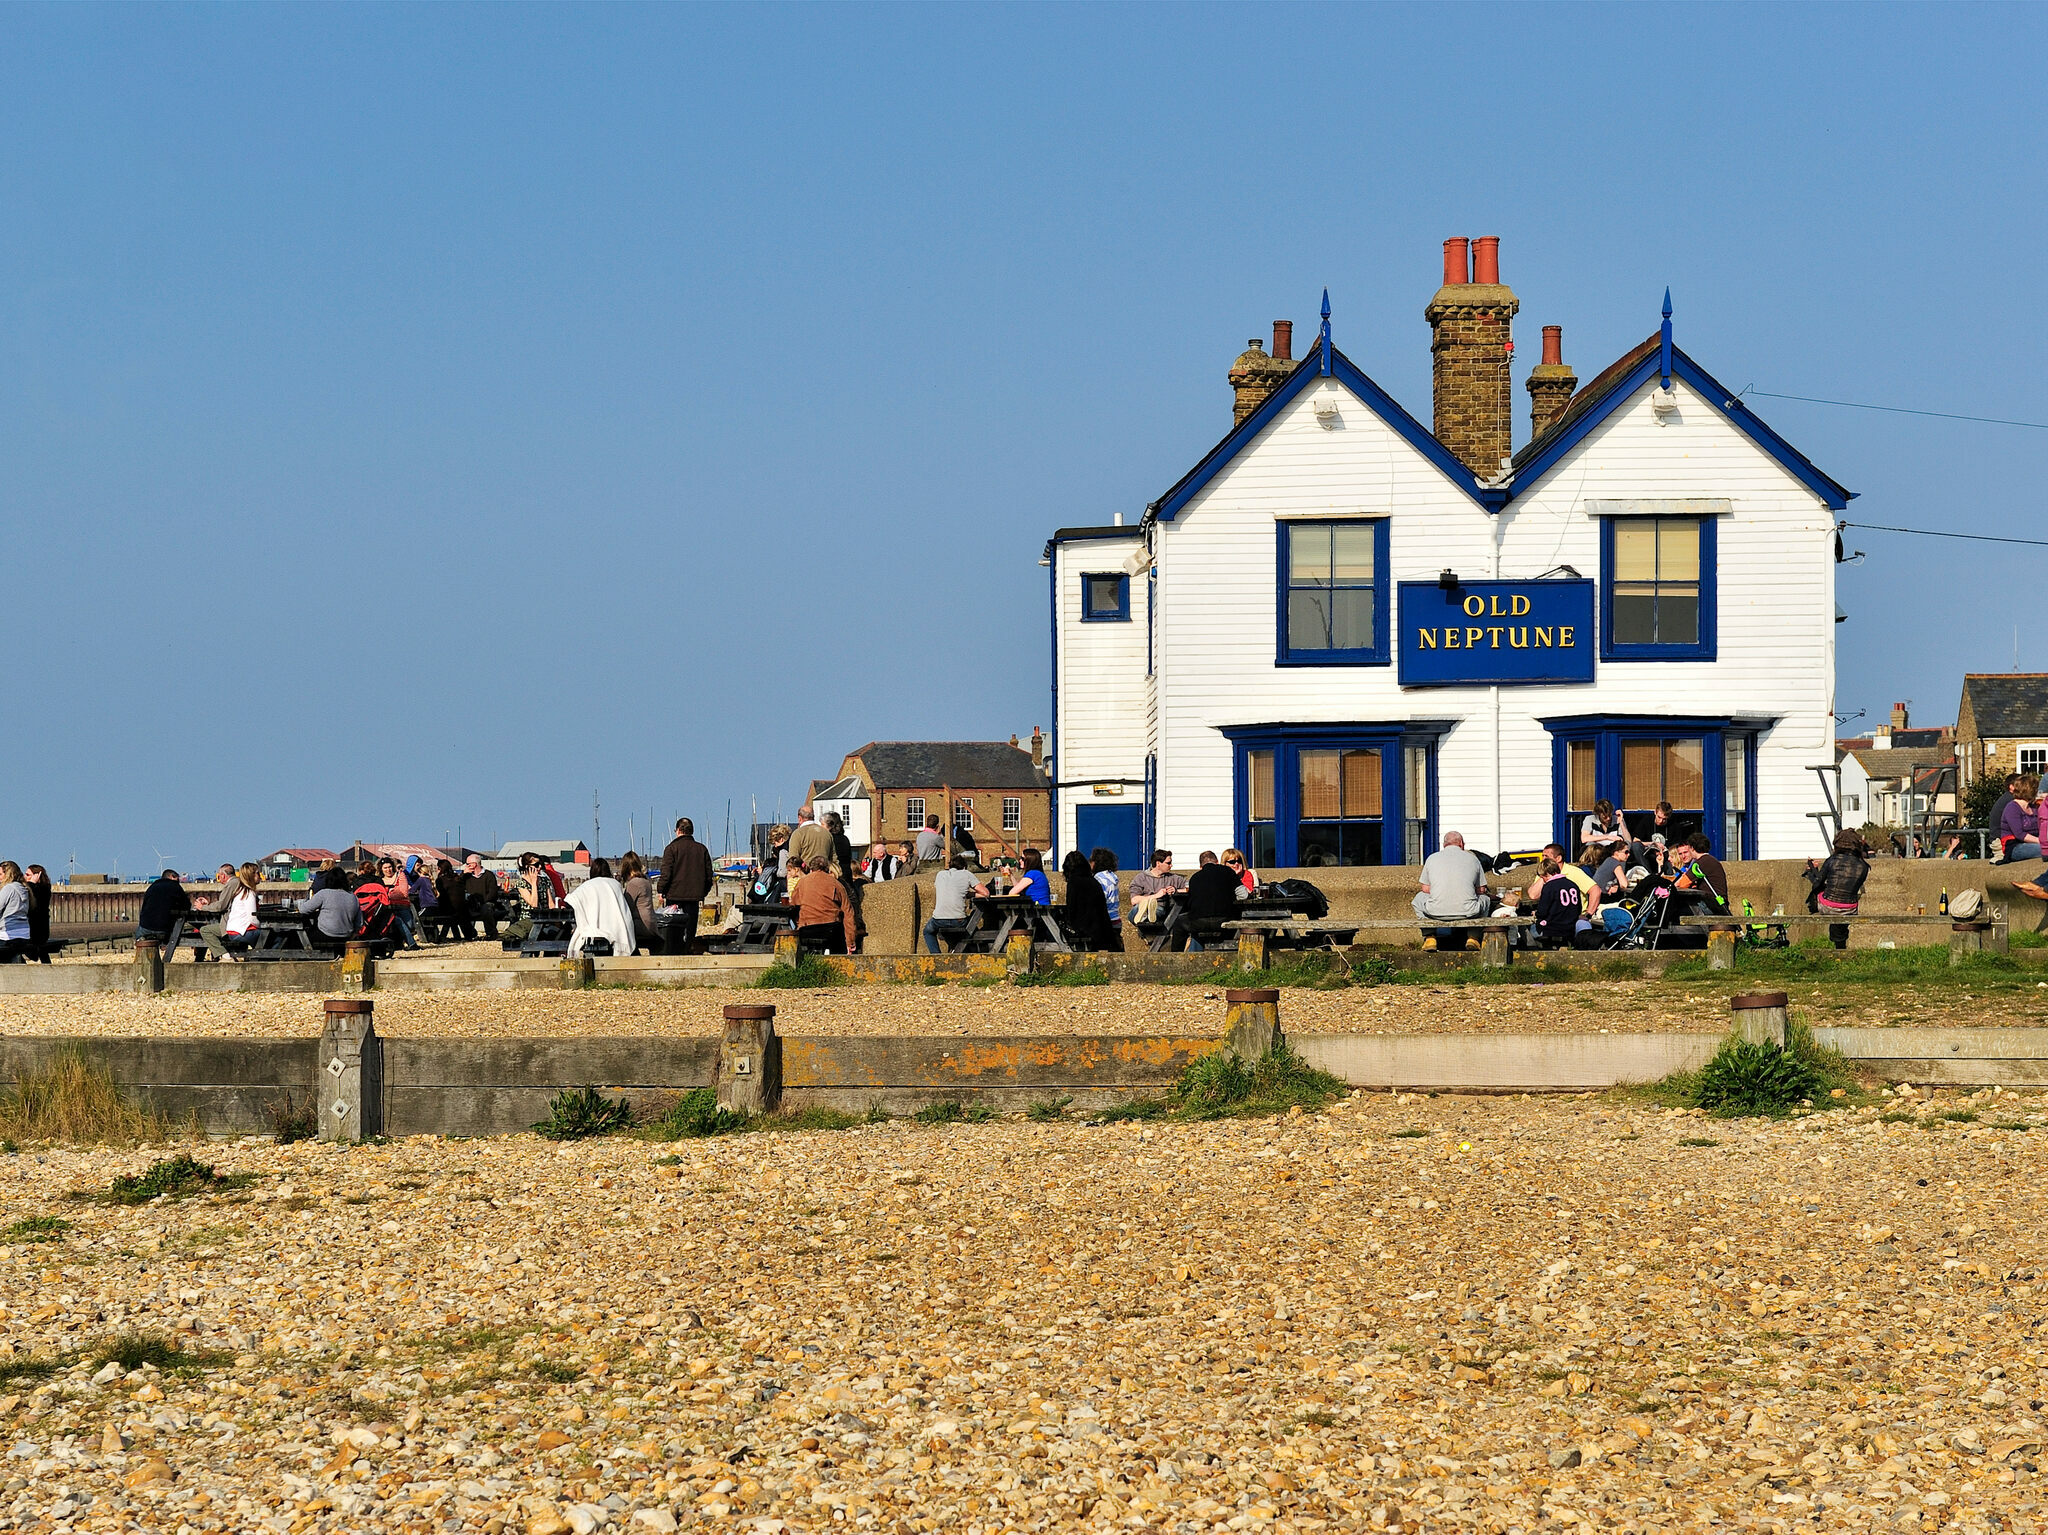 14 Things to Do in Deal, Kent - Yorke Lodge